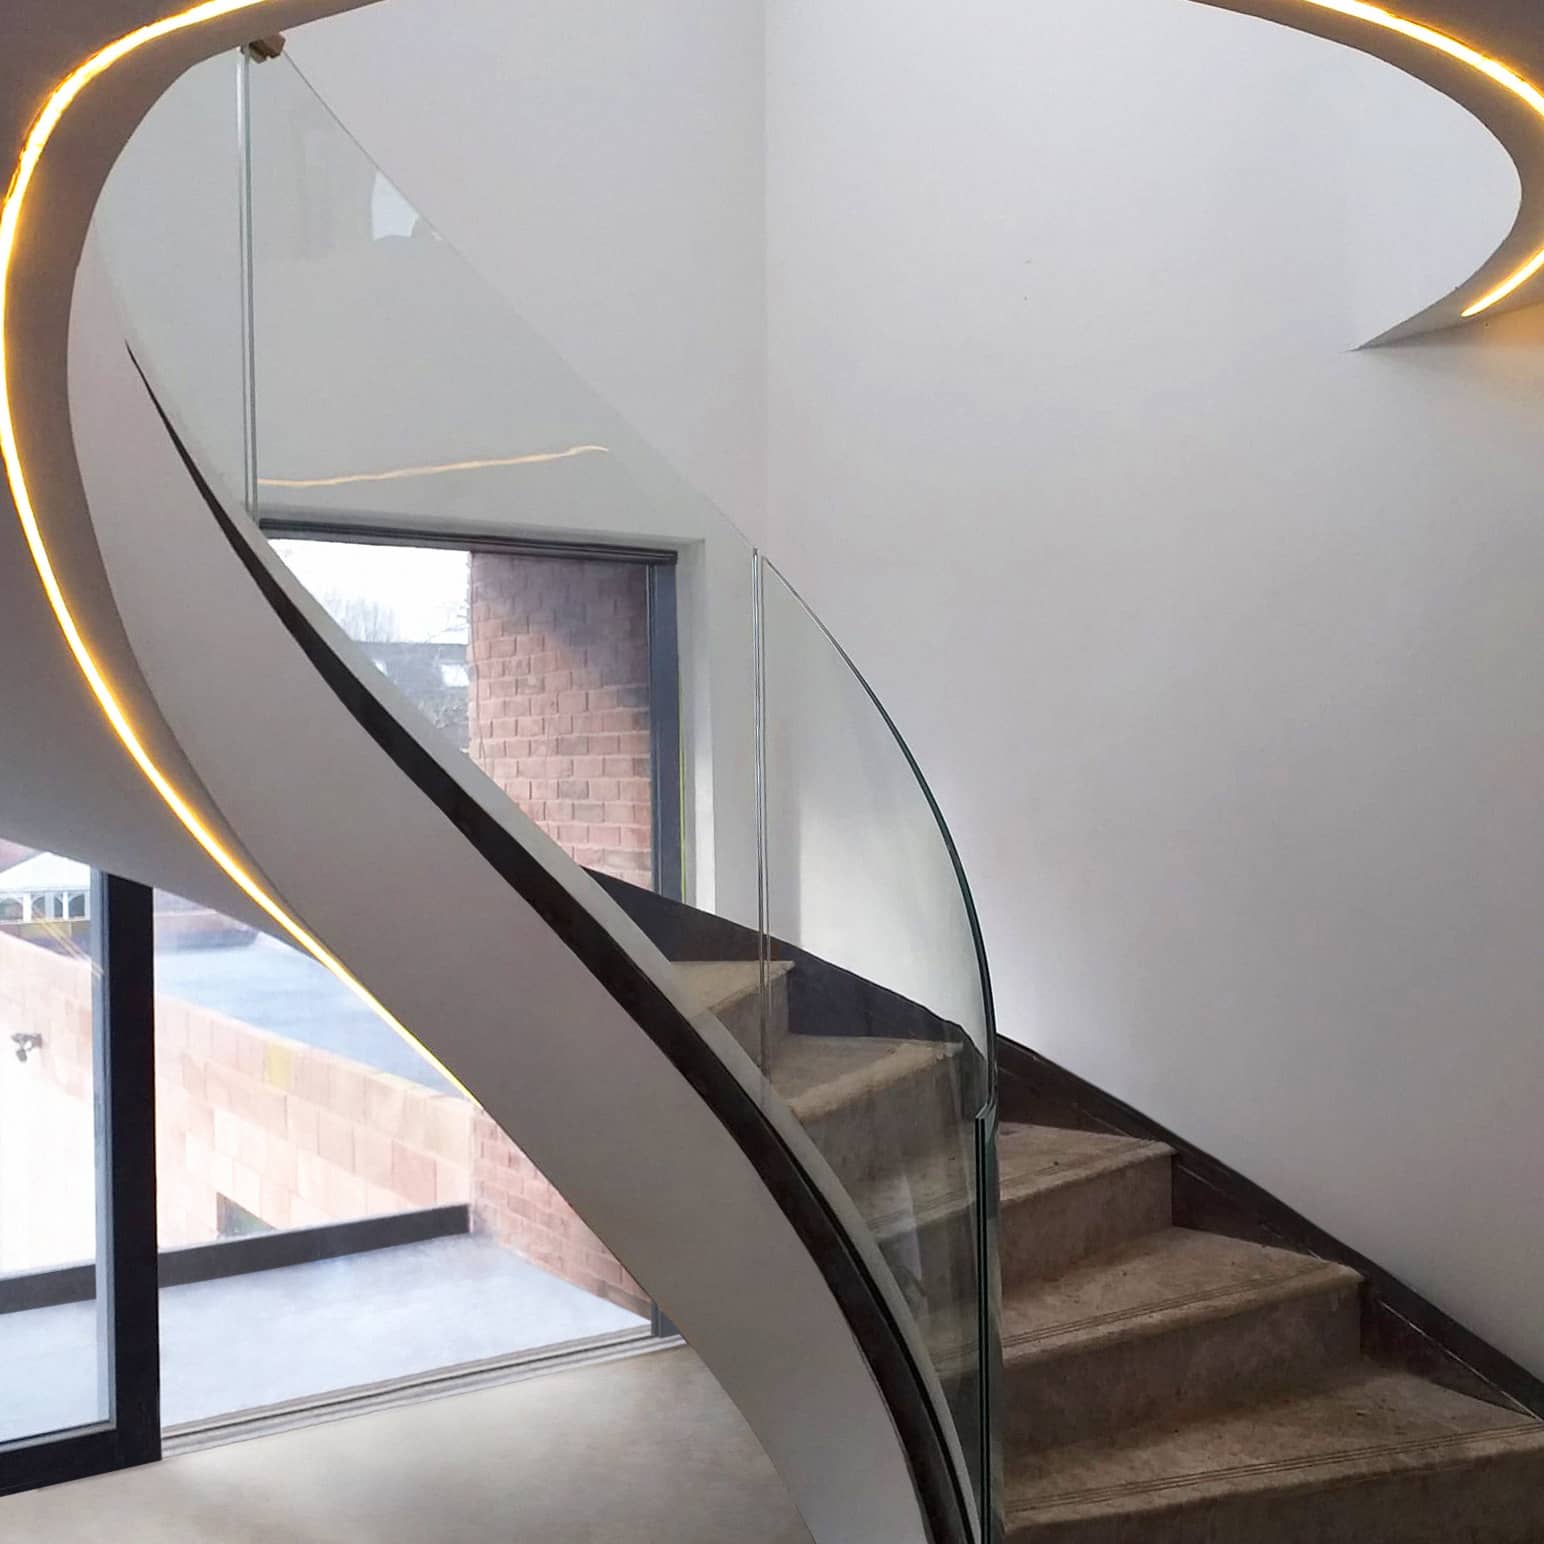 Helical glass staircase with curved balustrade